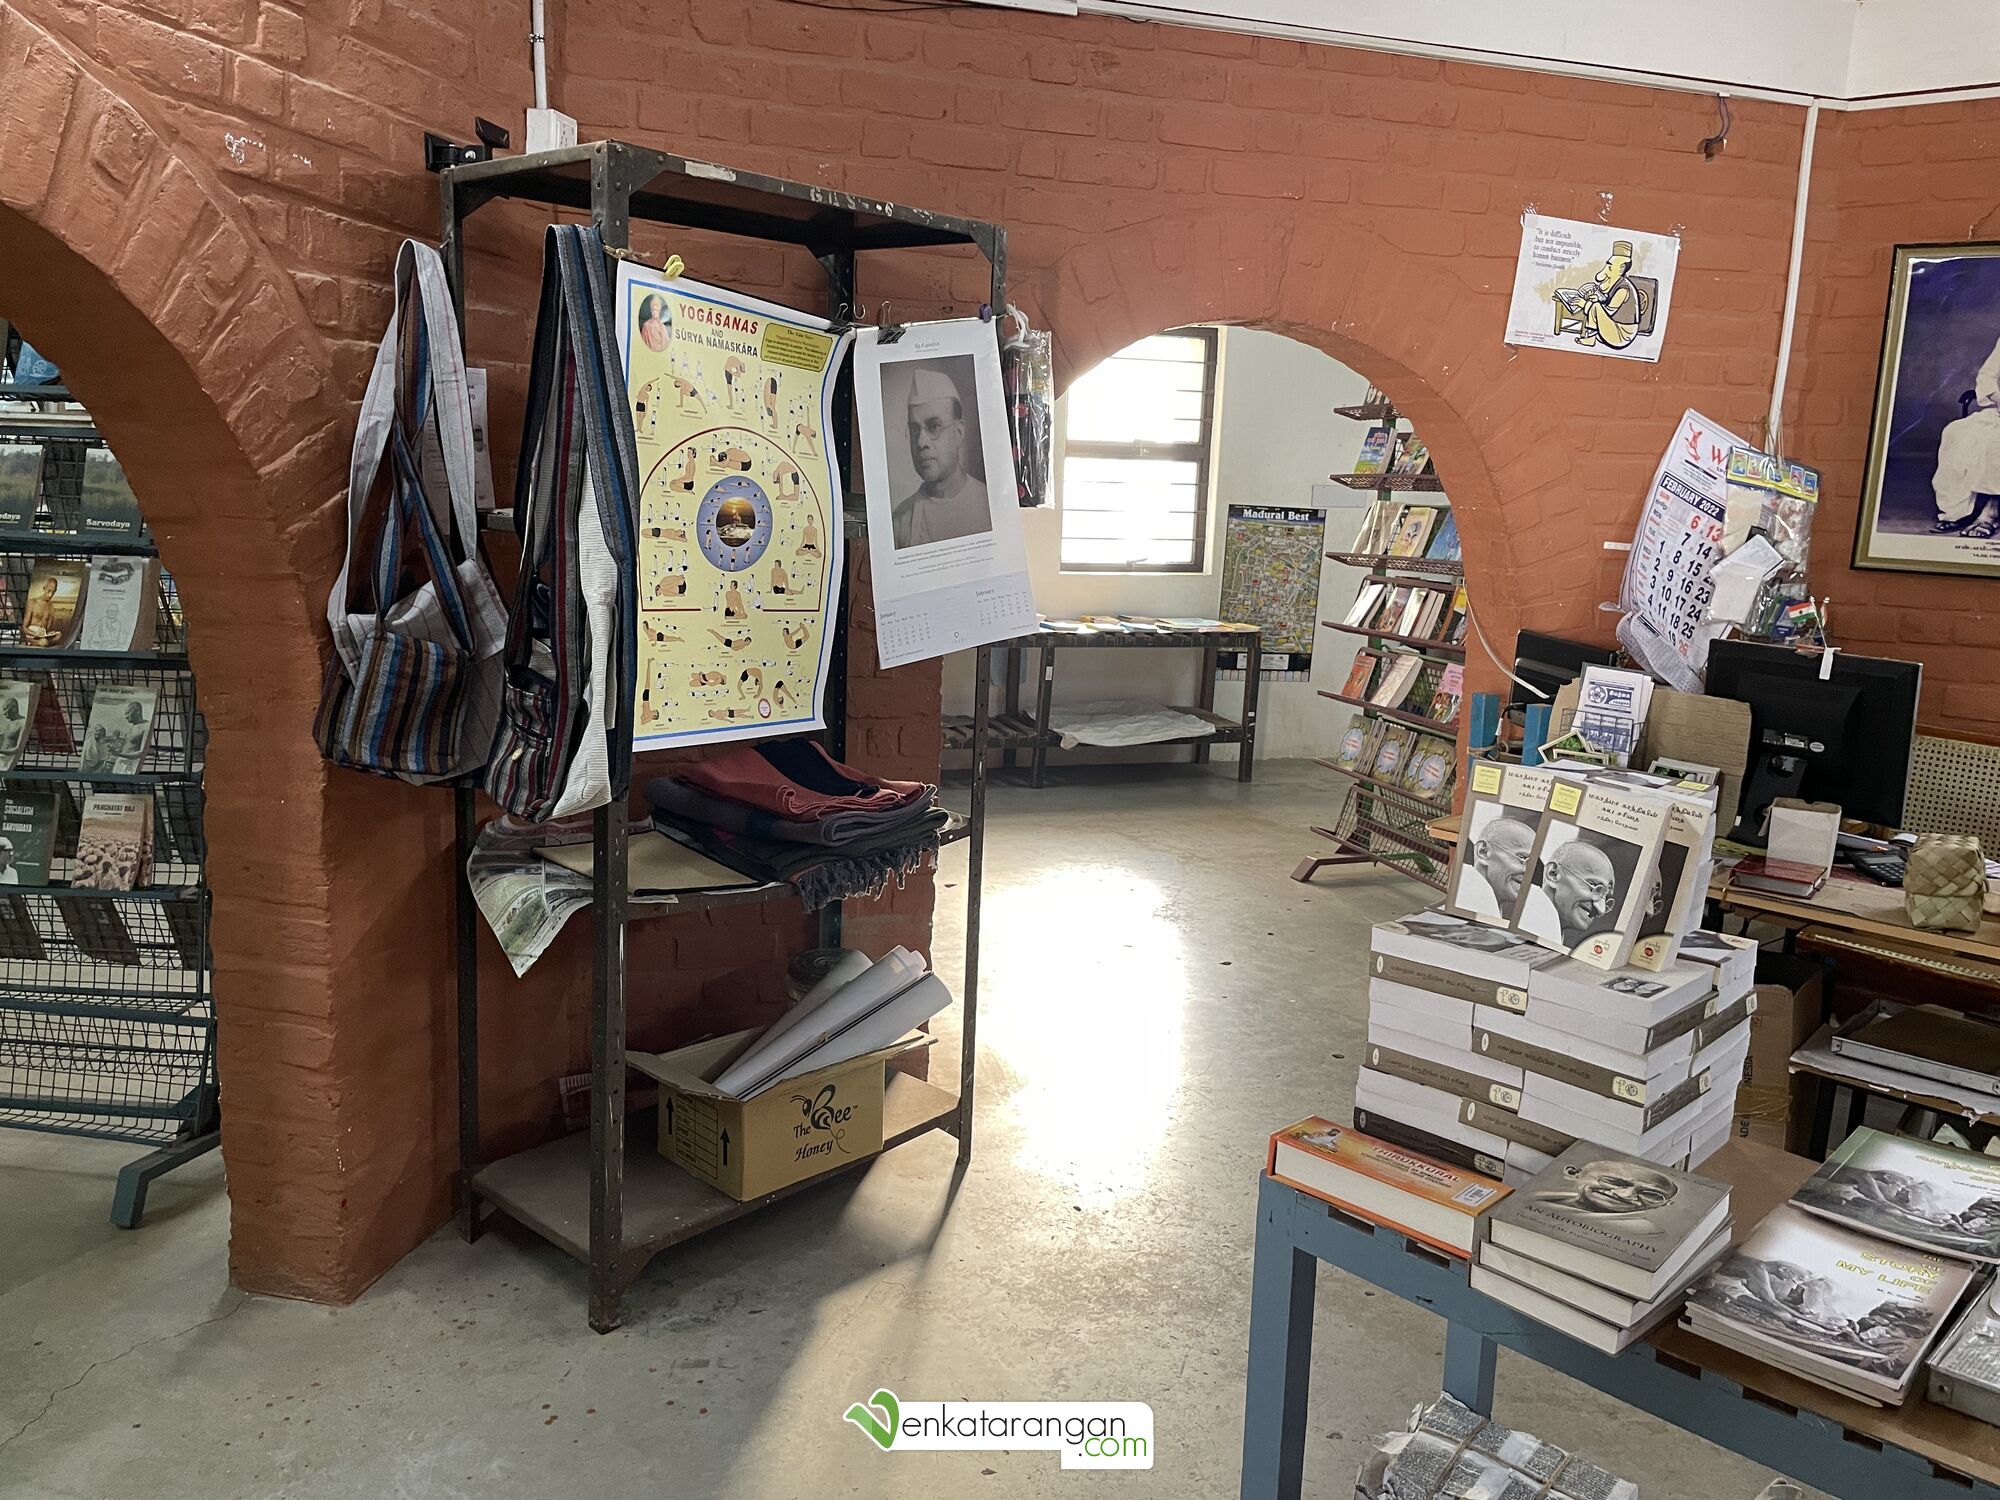 Gift shop selling Gandhi's autobiography and Khadi items